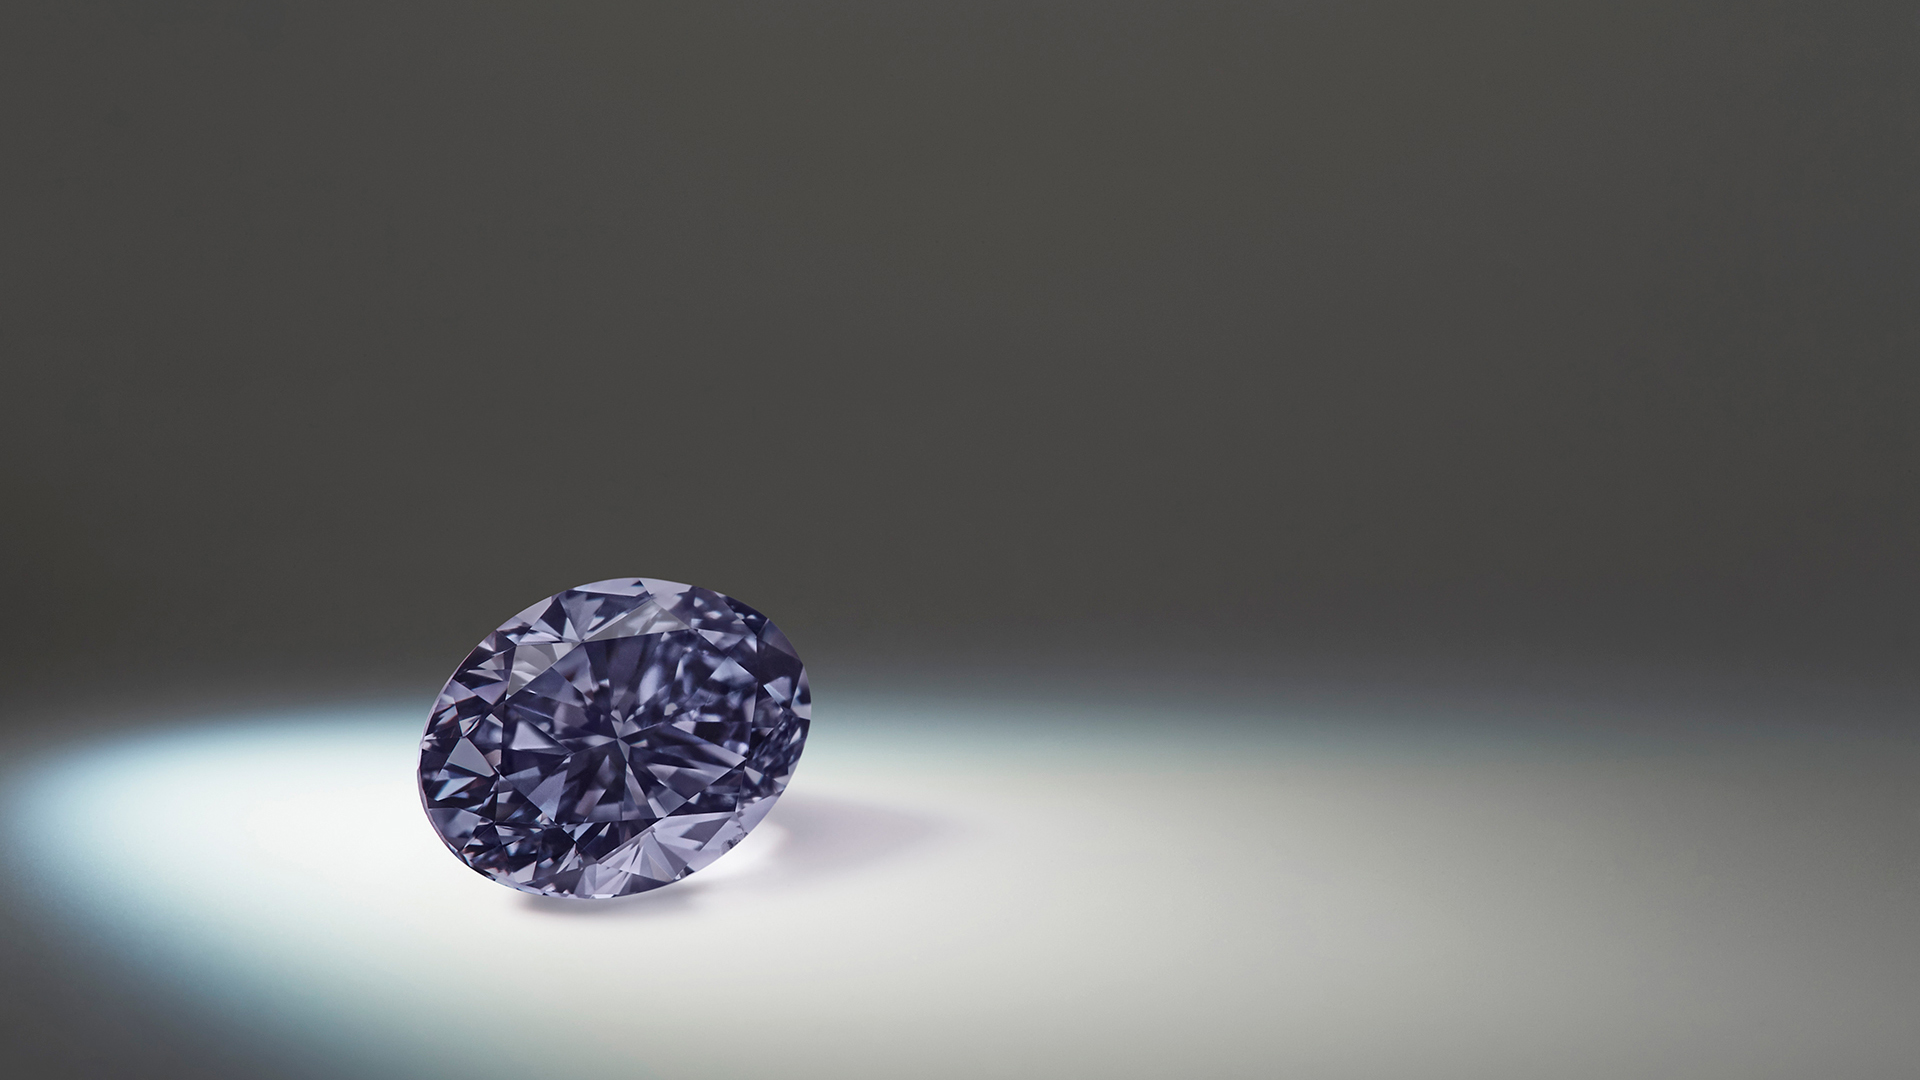 Argyle Infinité ™, a 0.70ct pear shaped Fancy Dark Violet-Gray diamond from the 2020 APD Tender. 